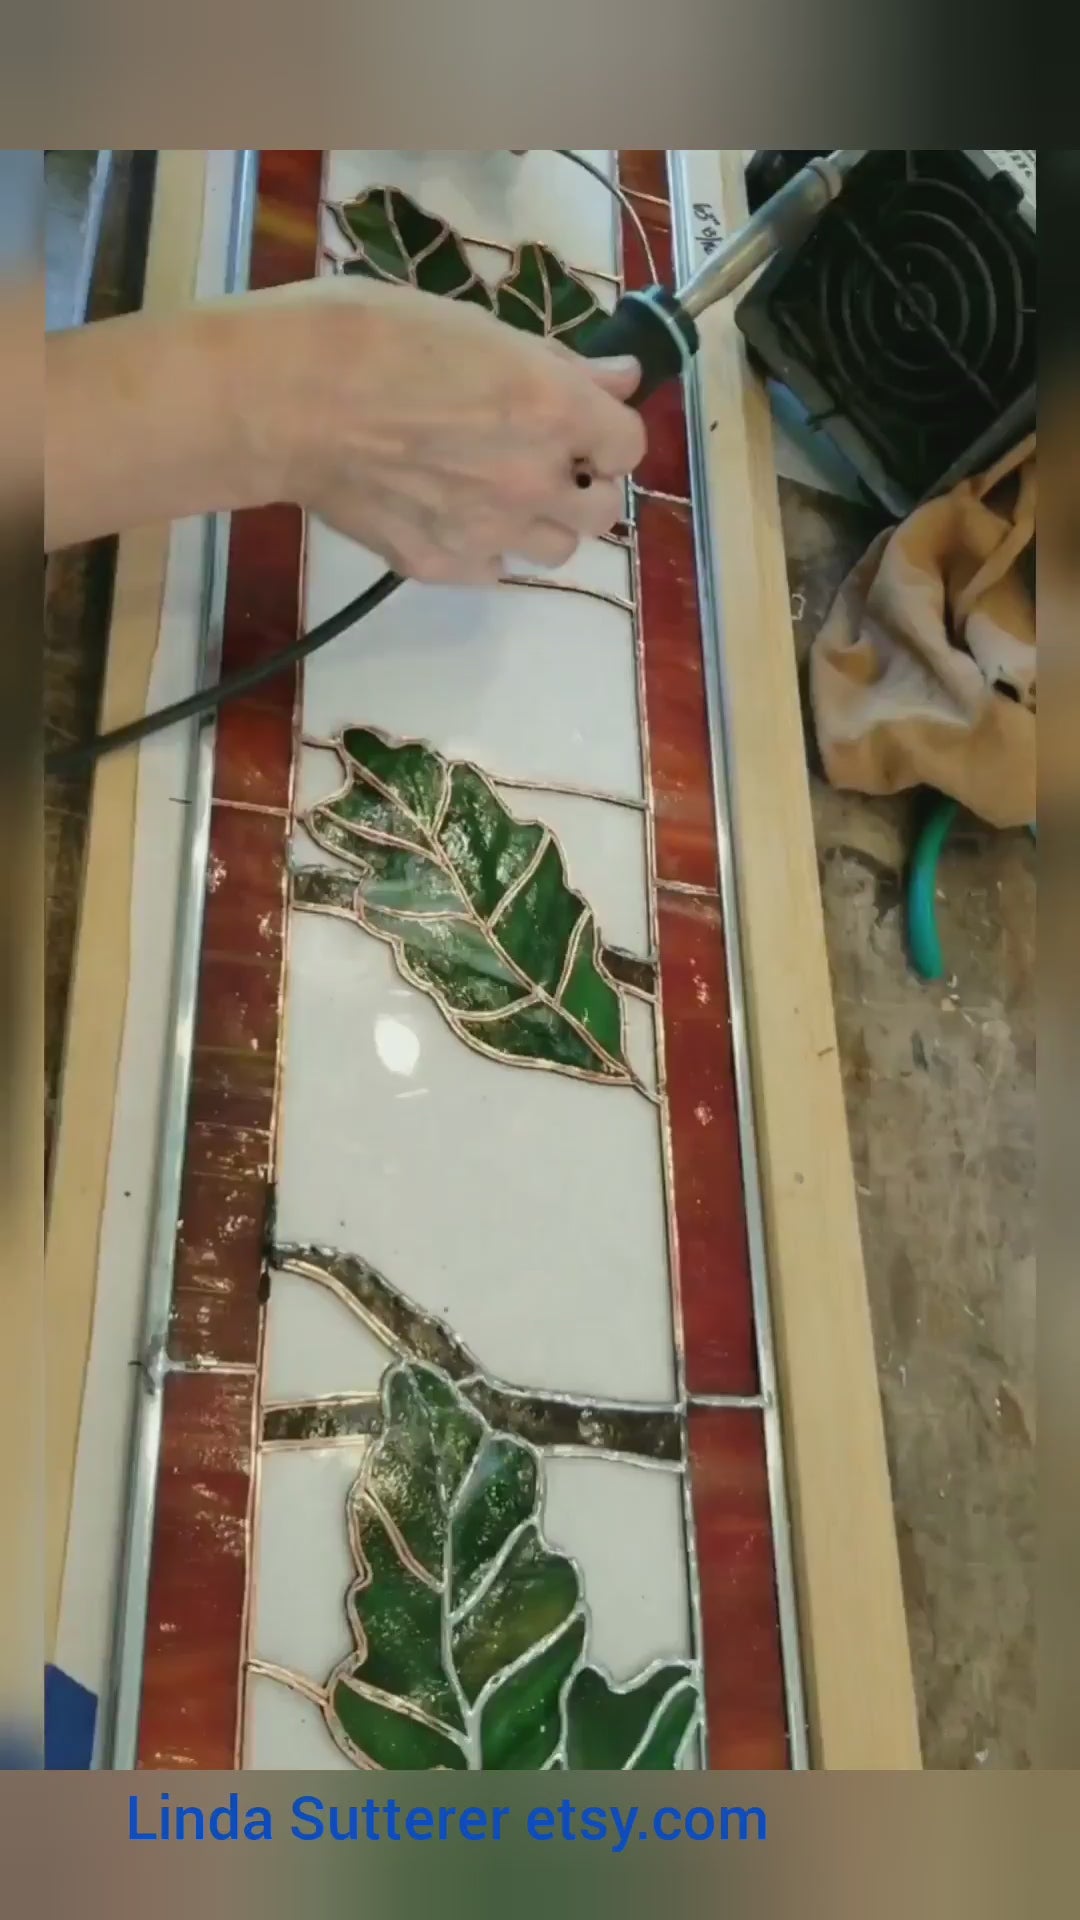 How to Solder Copper Foil for Stained Glass: 6 Tips